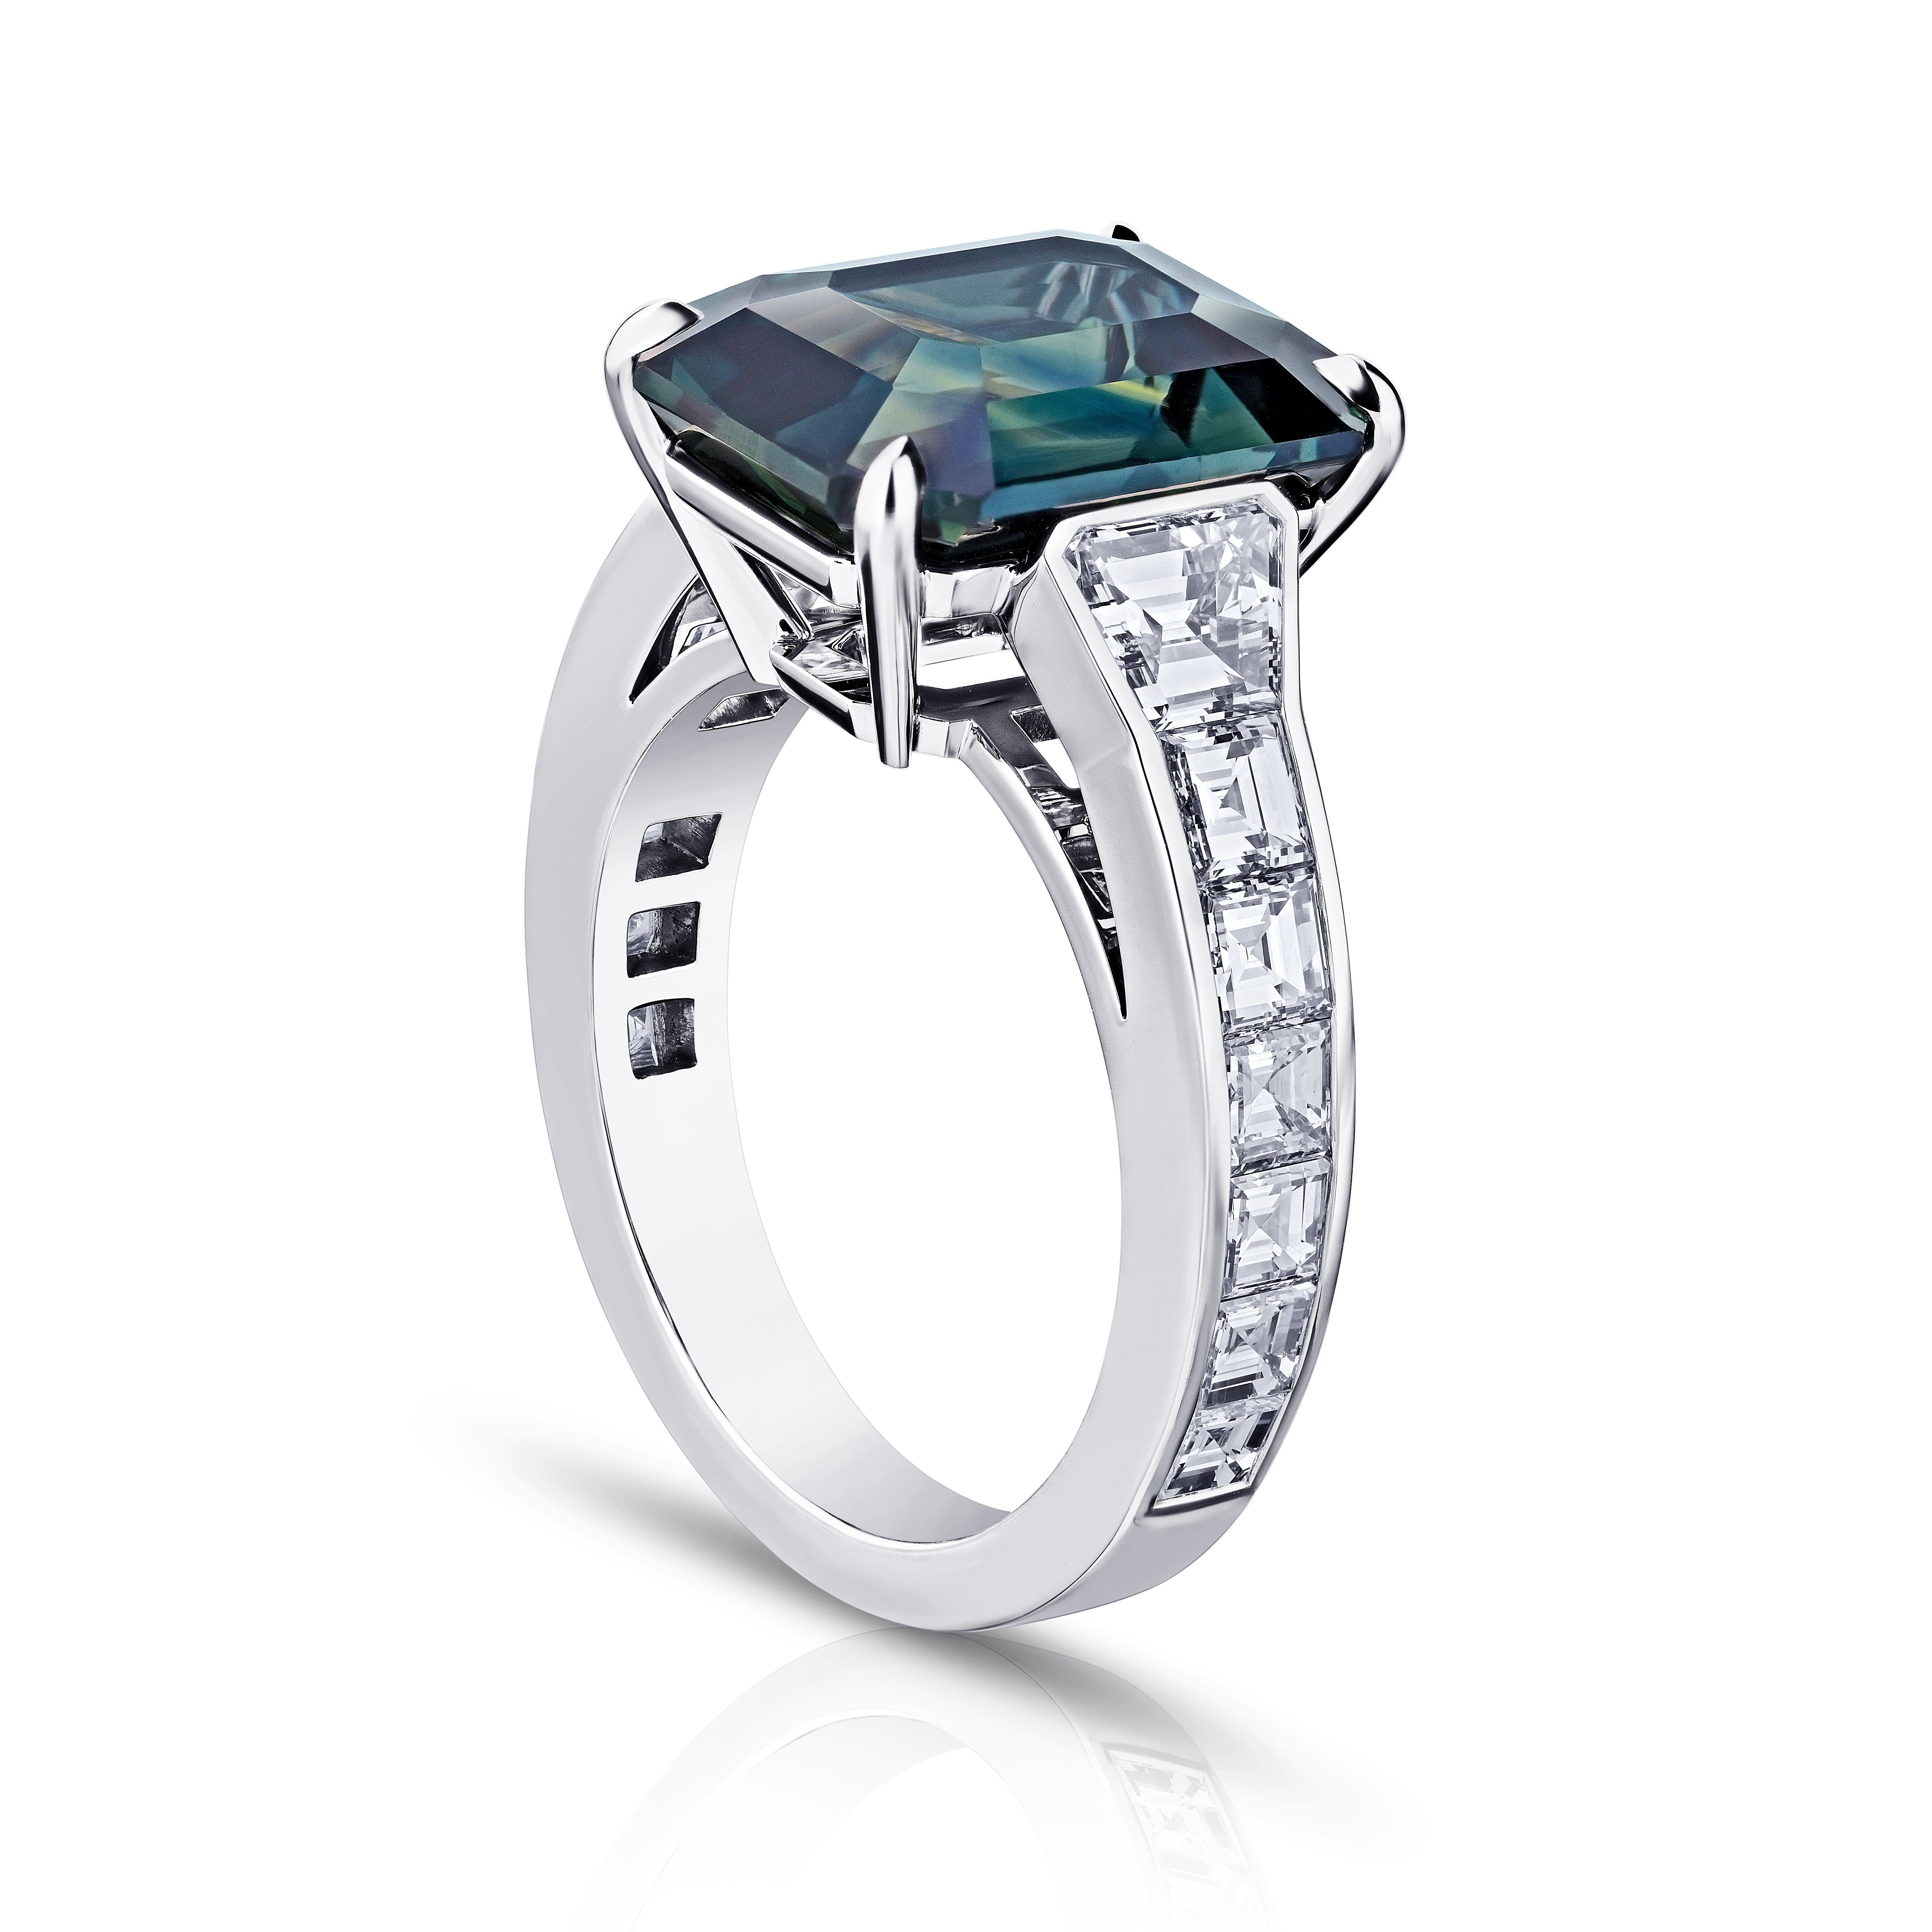 8.61 carat Emerald Cut Green Sapphire with two Trapezoid Diamonds 1.61 carats set in a handmade Platinum ring